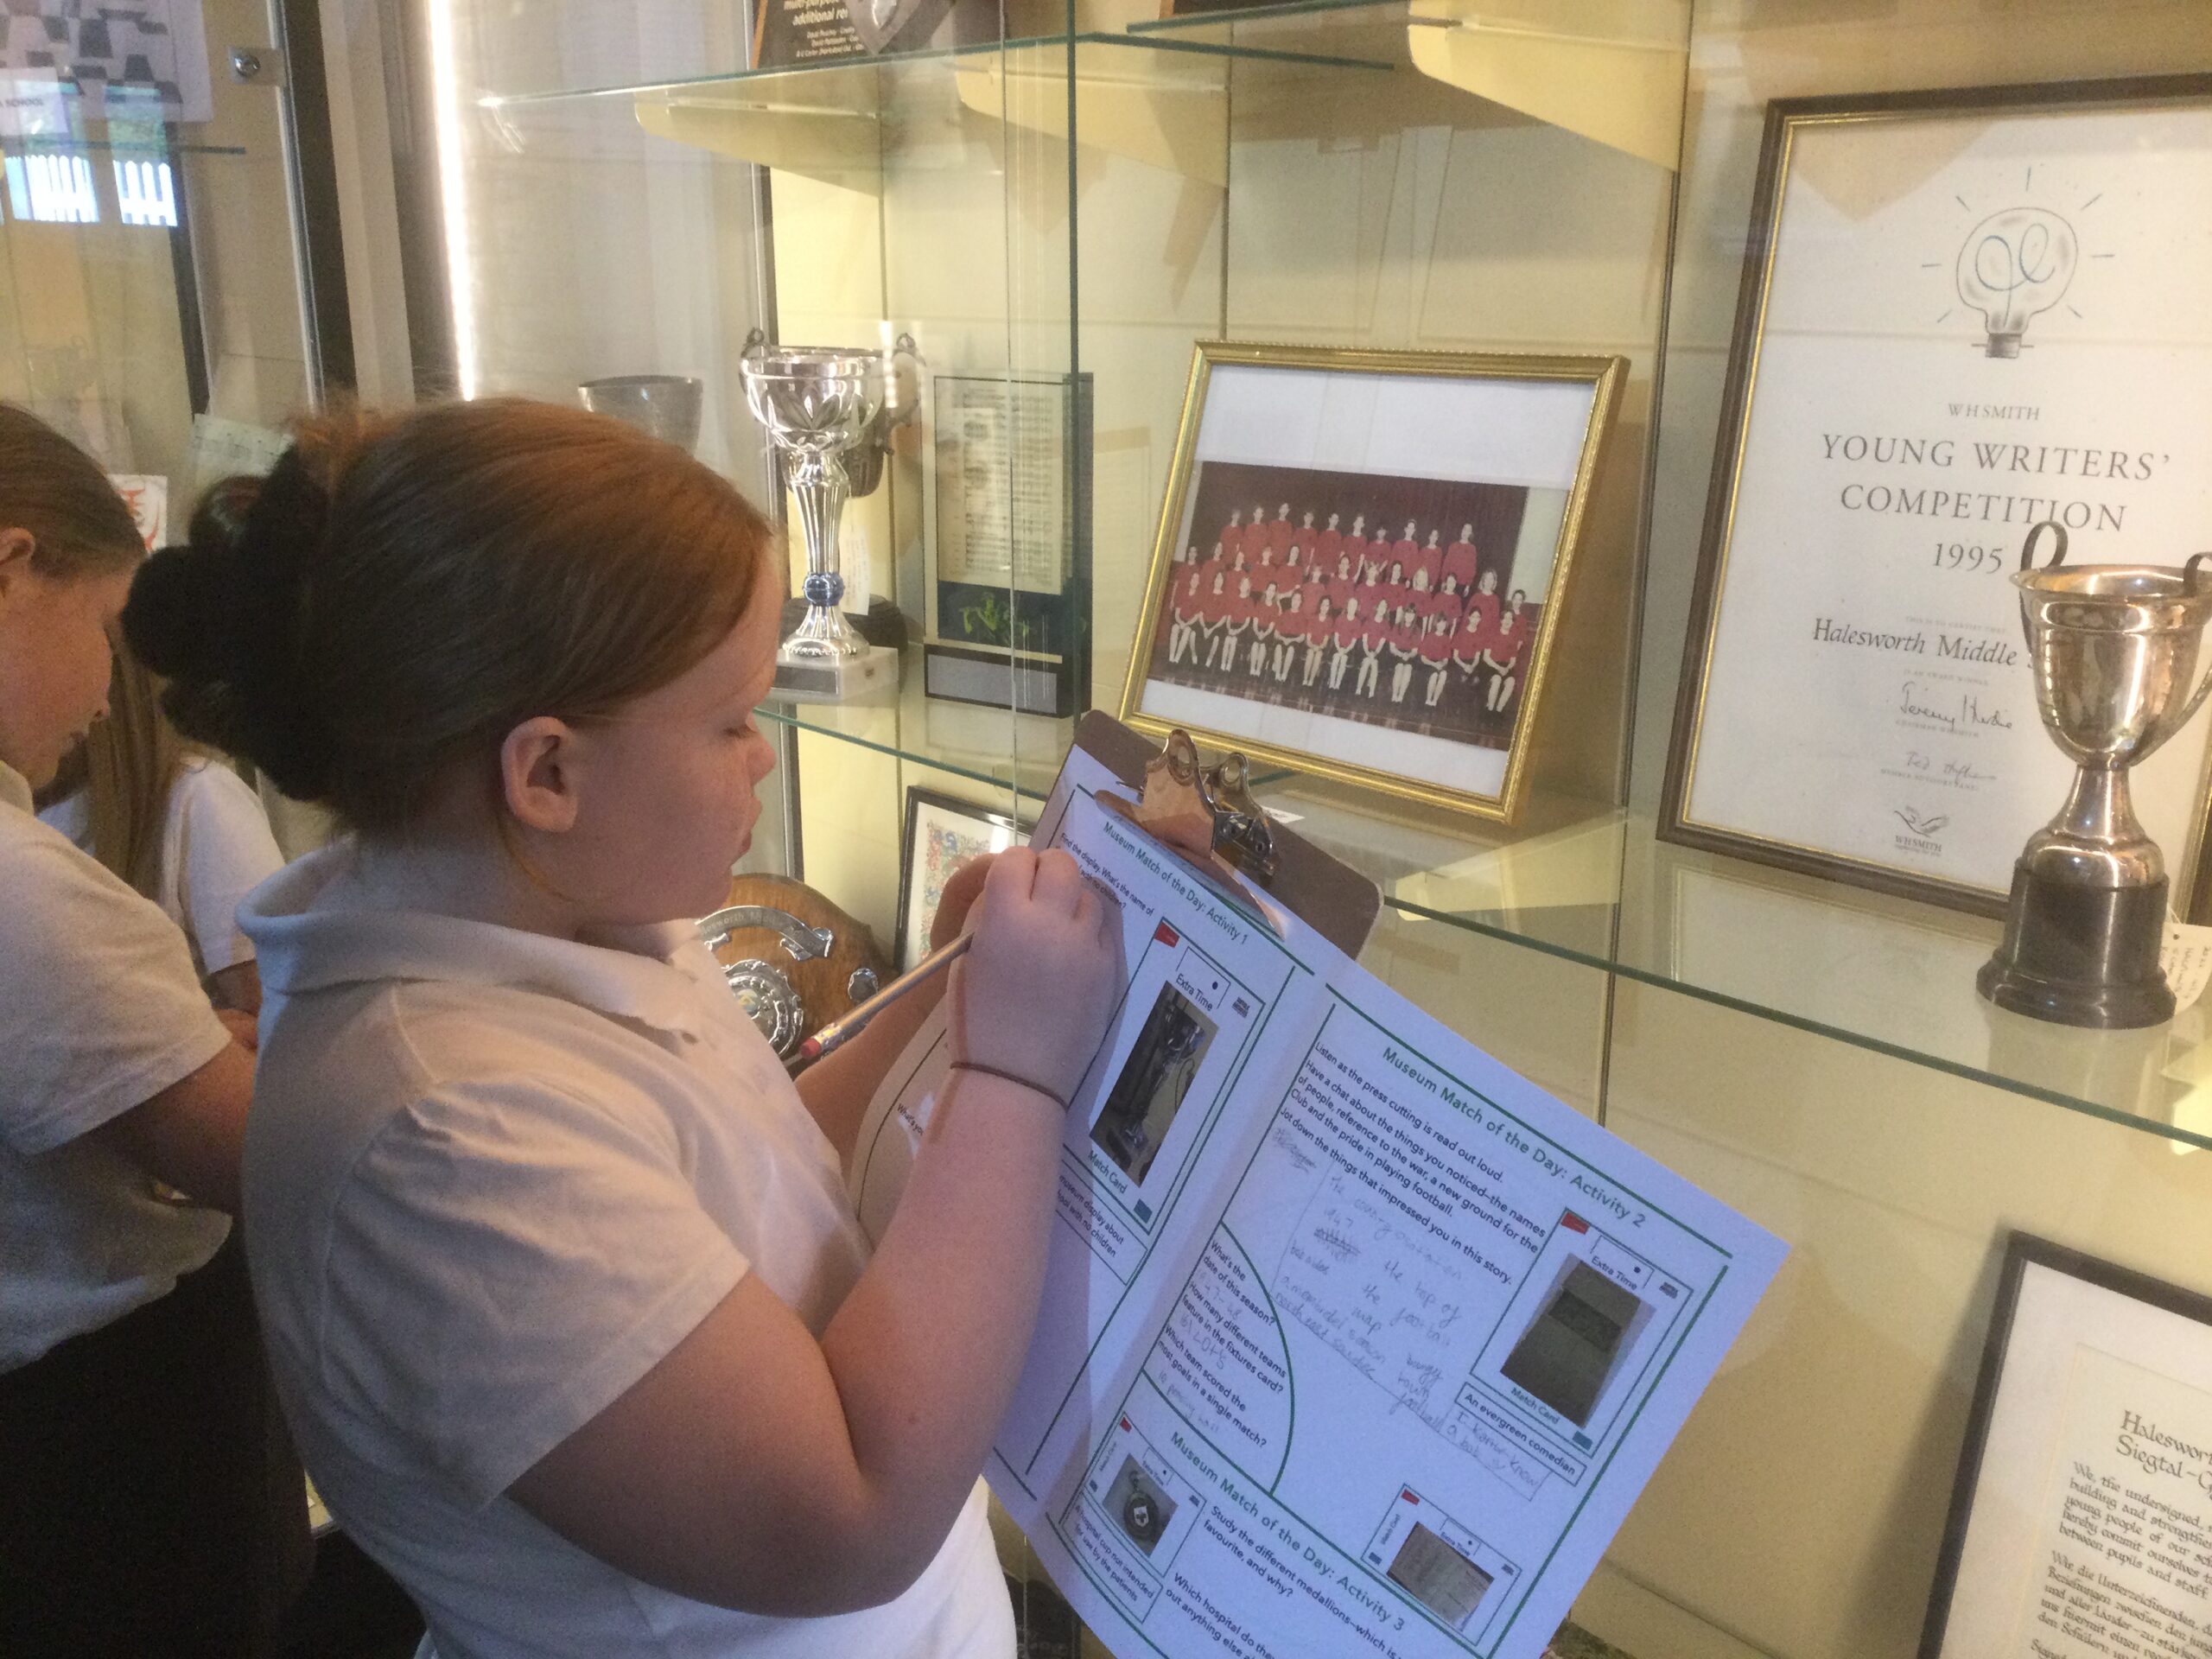 A school girl in front of a display case with trophies and photographs, writing something on her worksheet.